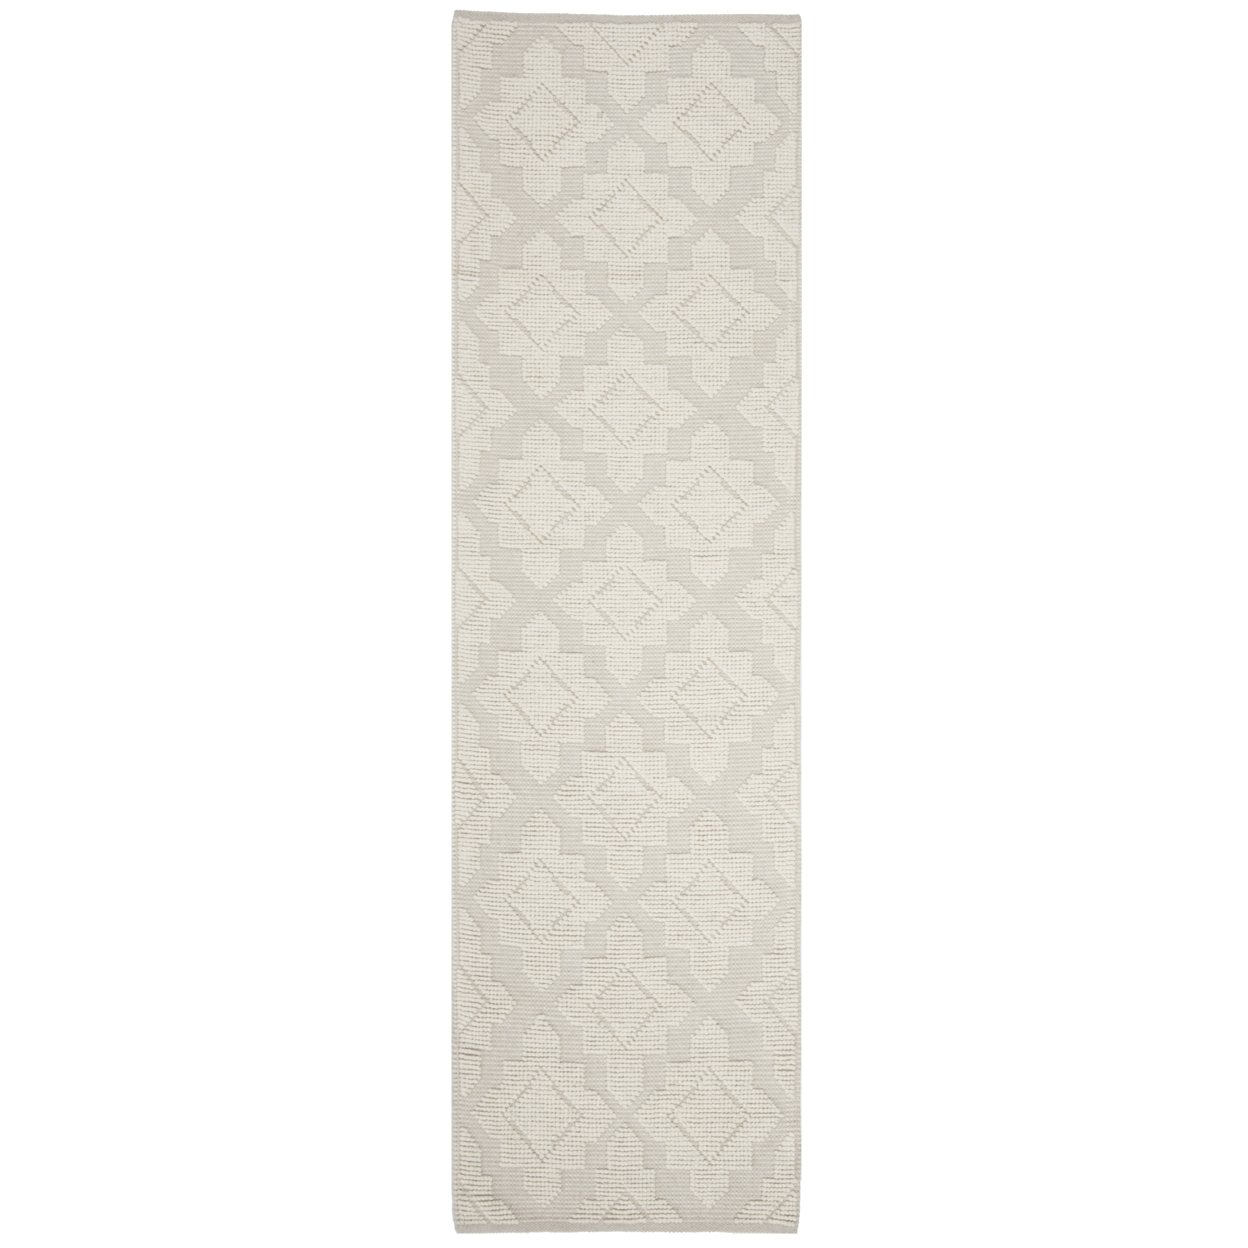 SAFAVIEH Vermont Collection VRM103A Handwoven Ivory Rug - 6 X 9